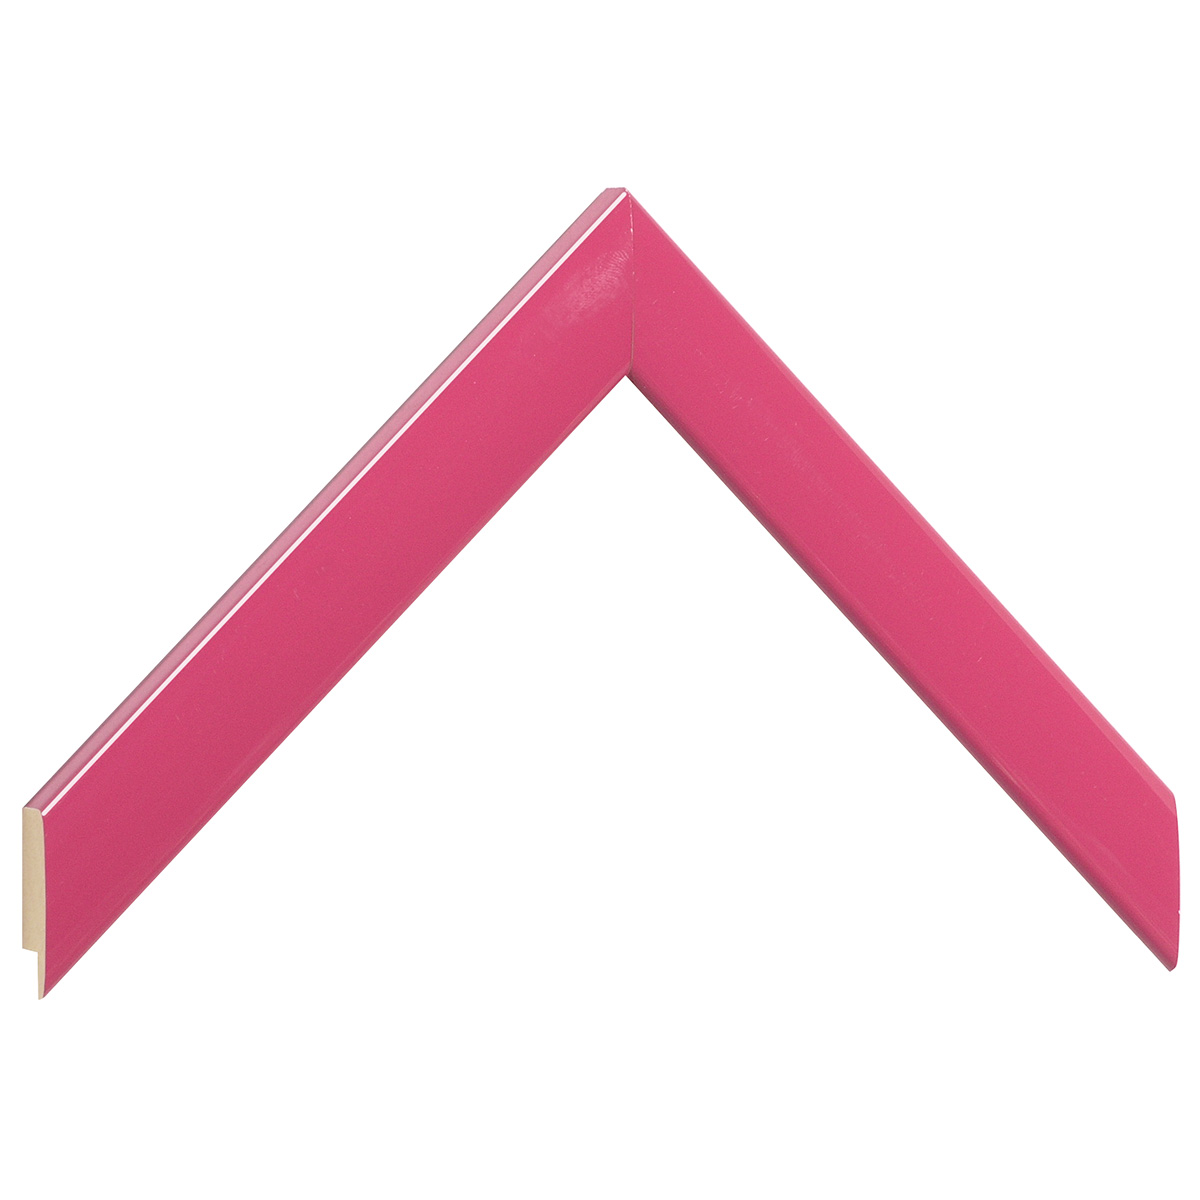 Moulding ayous, width 23mm height 13 - glossy finish, pink - Sample